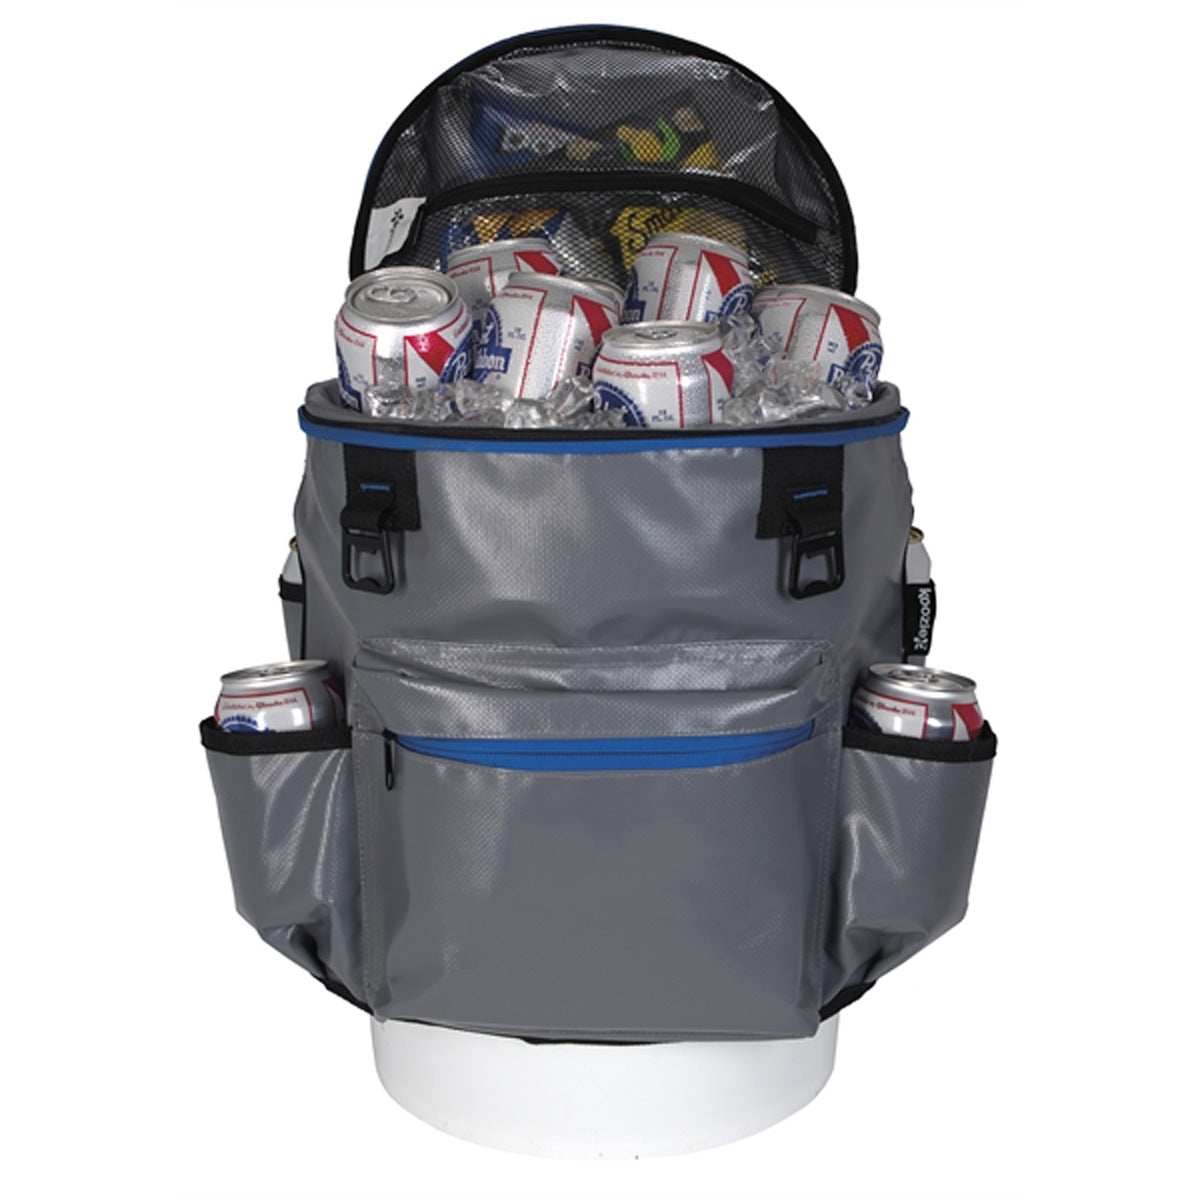 Koozie Insulated Cooler Bag – Holds 5 Gallon Ice Bucket